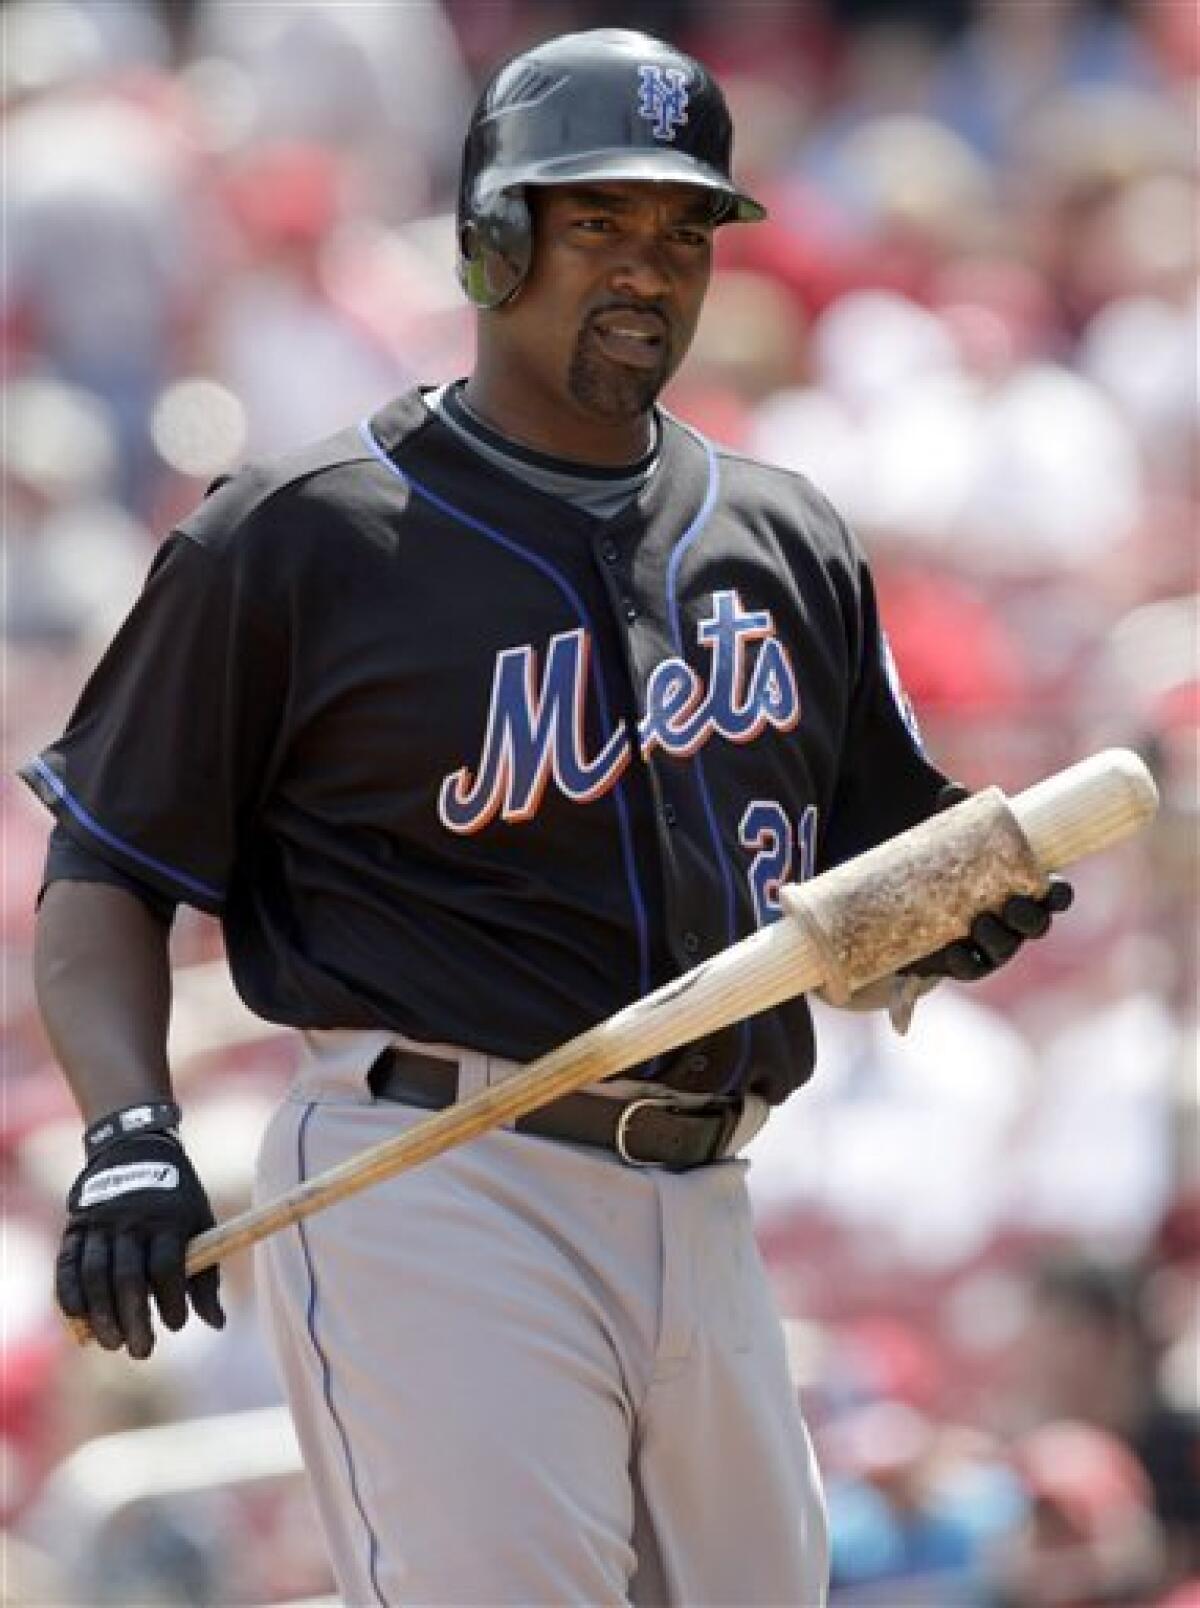 Mets 1B Delgado to undergo surgery on right hip - The San Diego